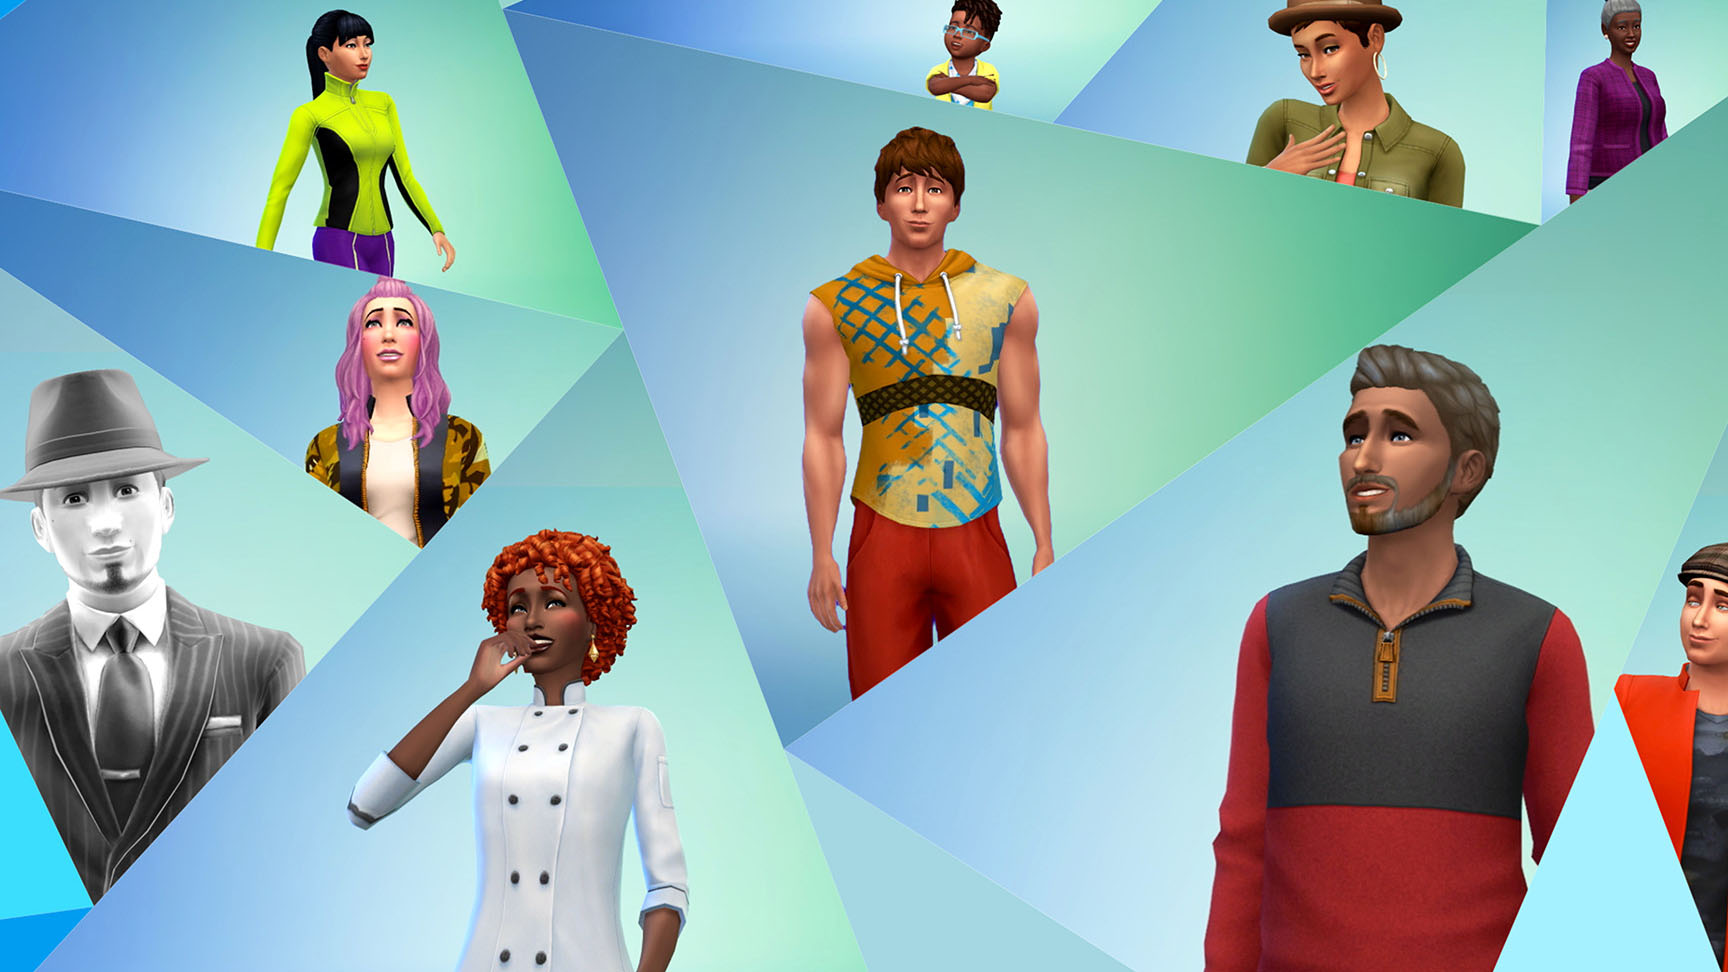 All The Sims 4 October 31 Update Patch Notes